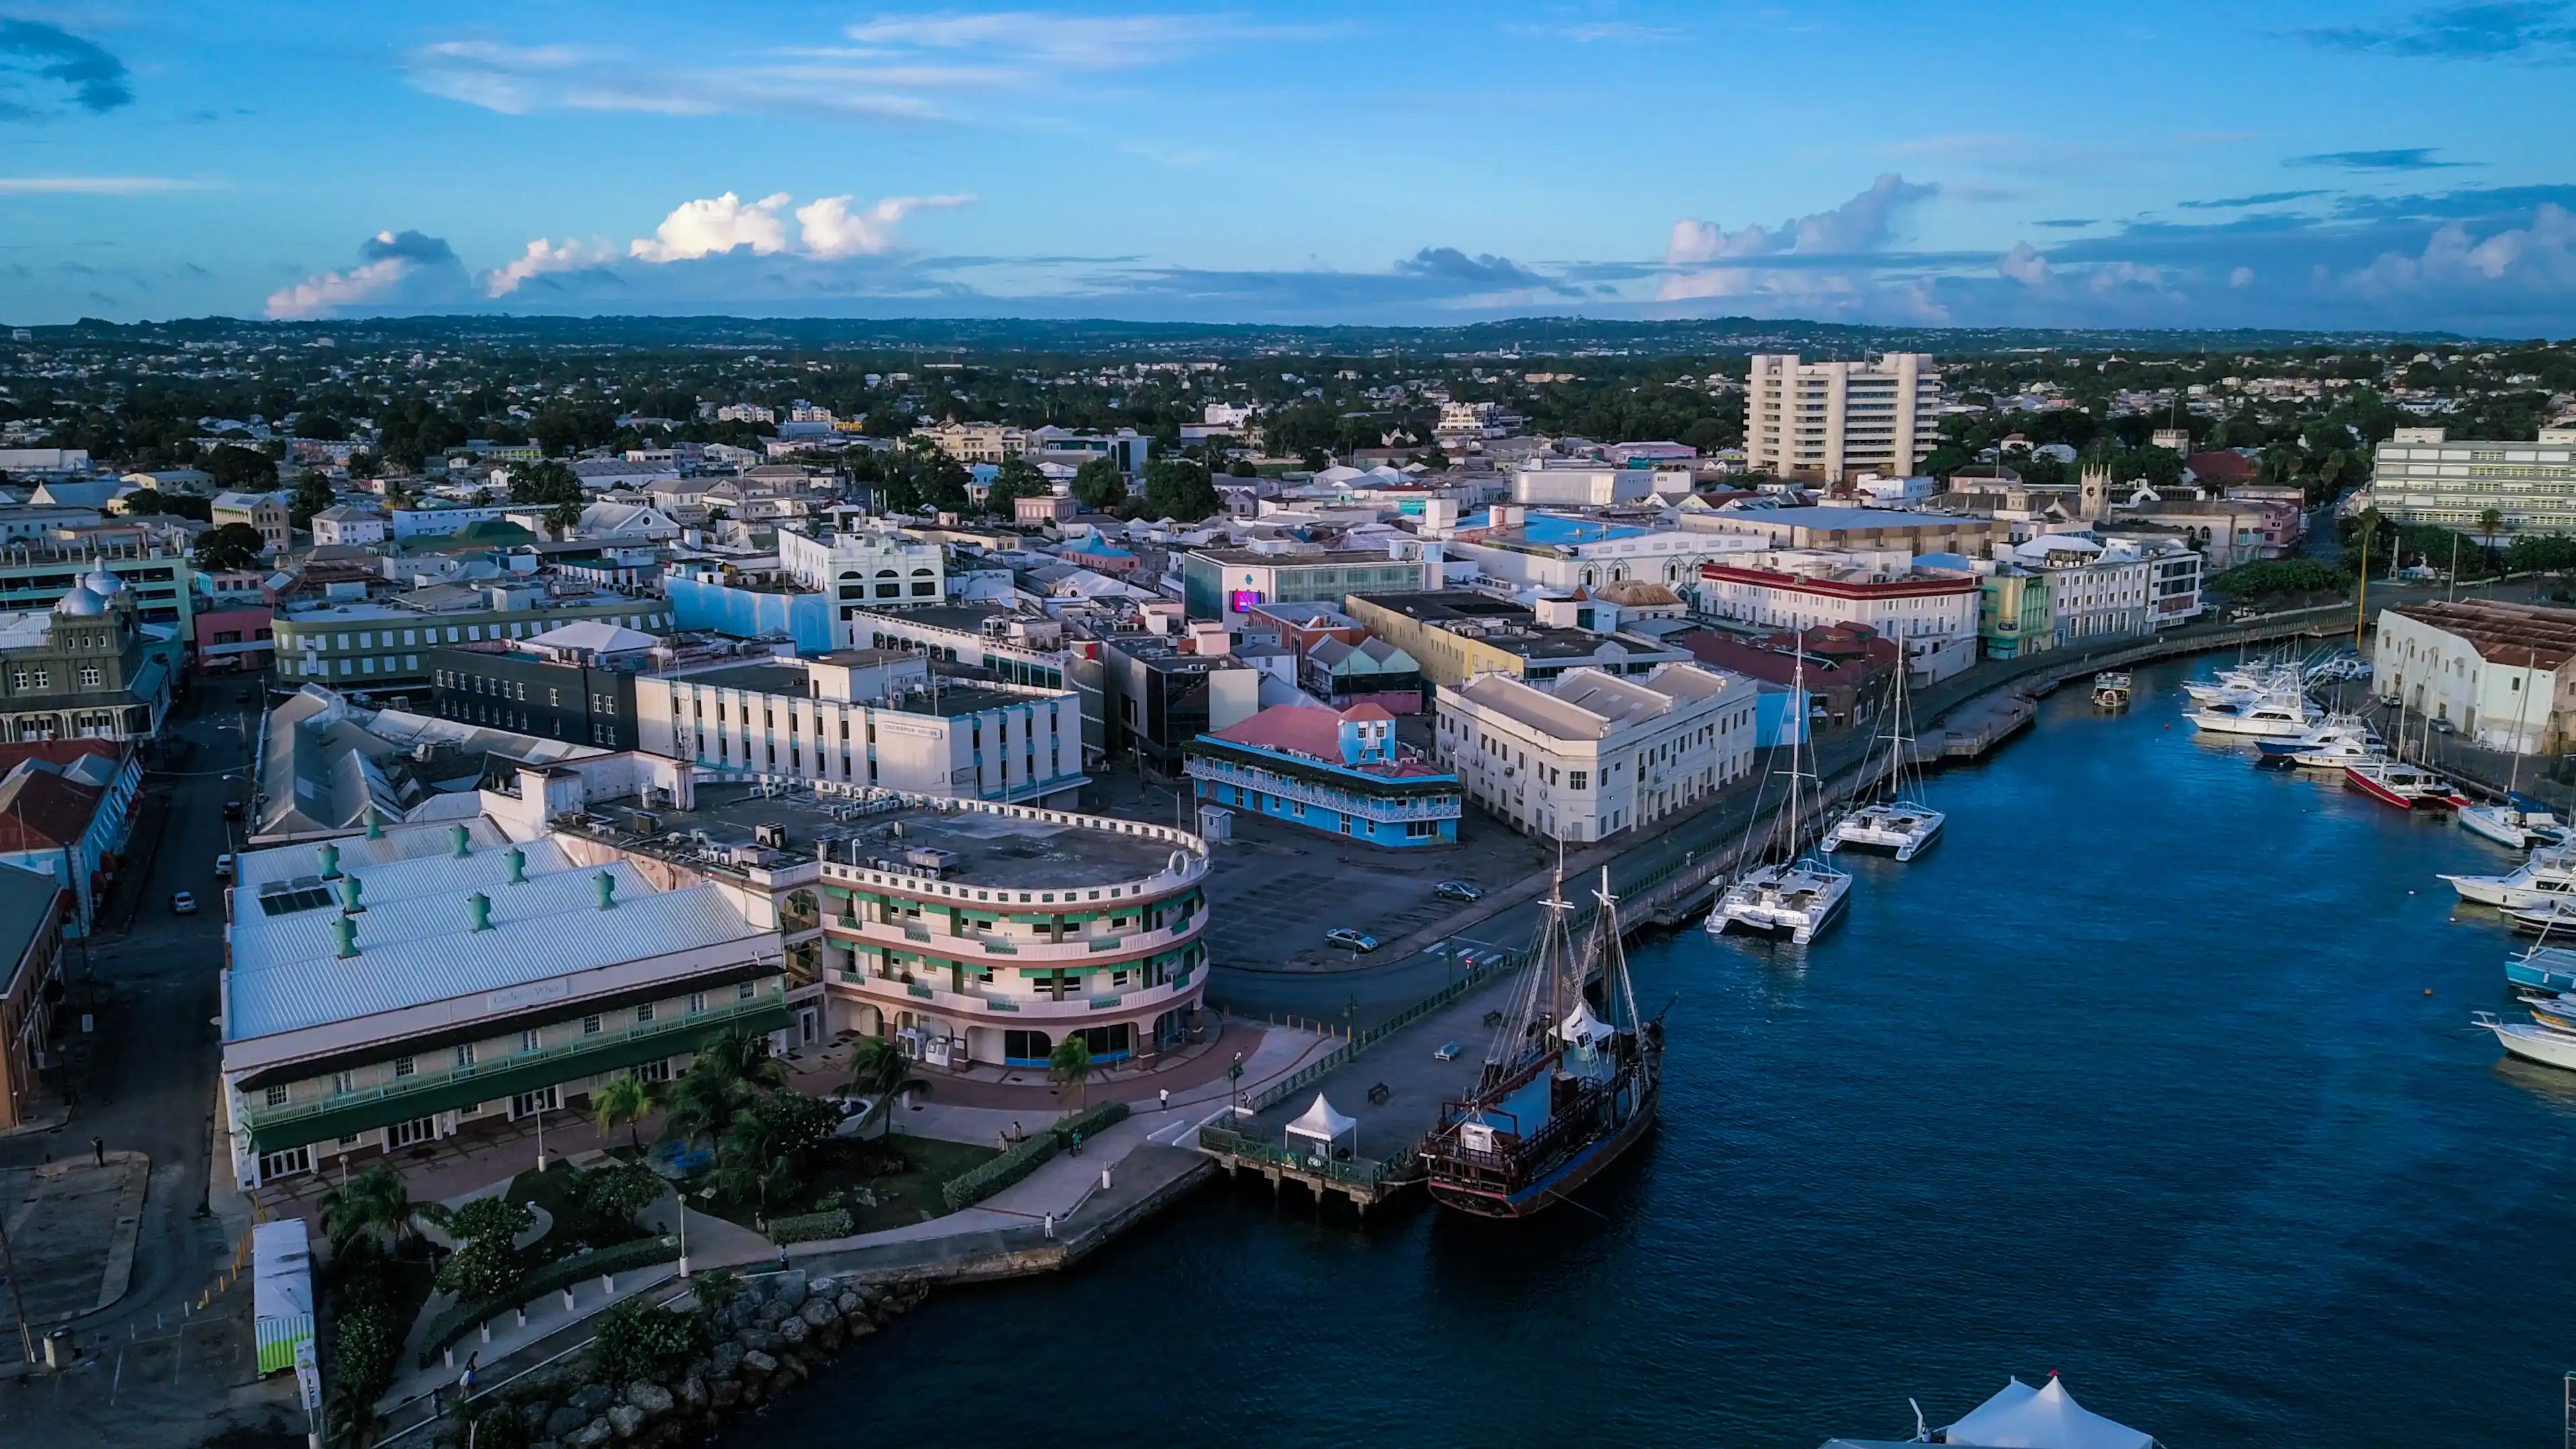 Barbados, Bridgetown - October 22, 2018: Aerial View to the Bridgetown with the Blue Water